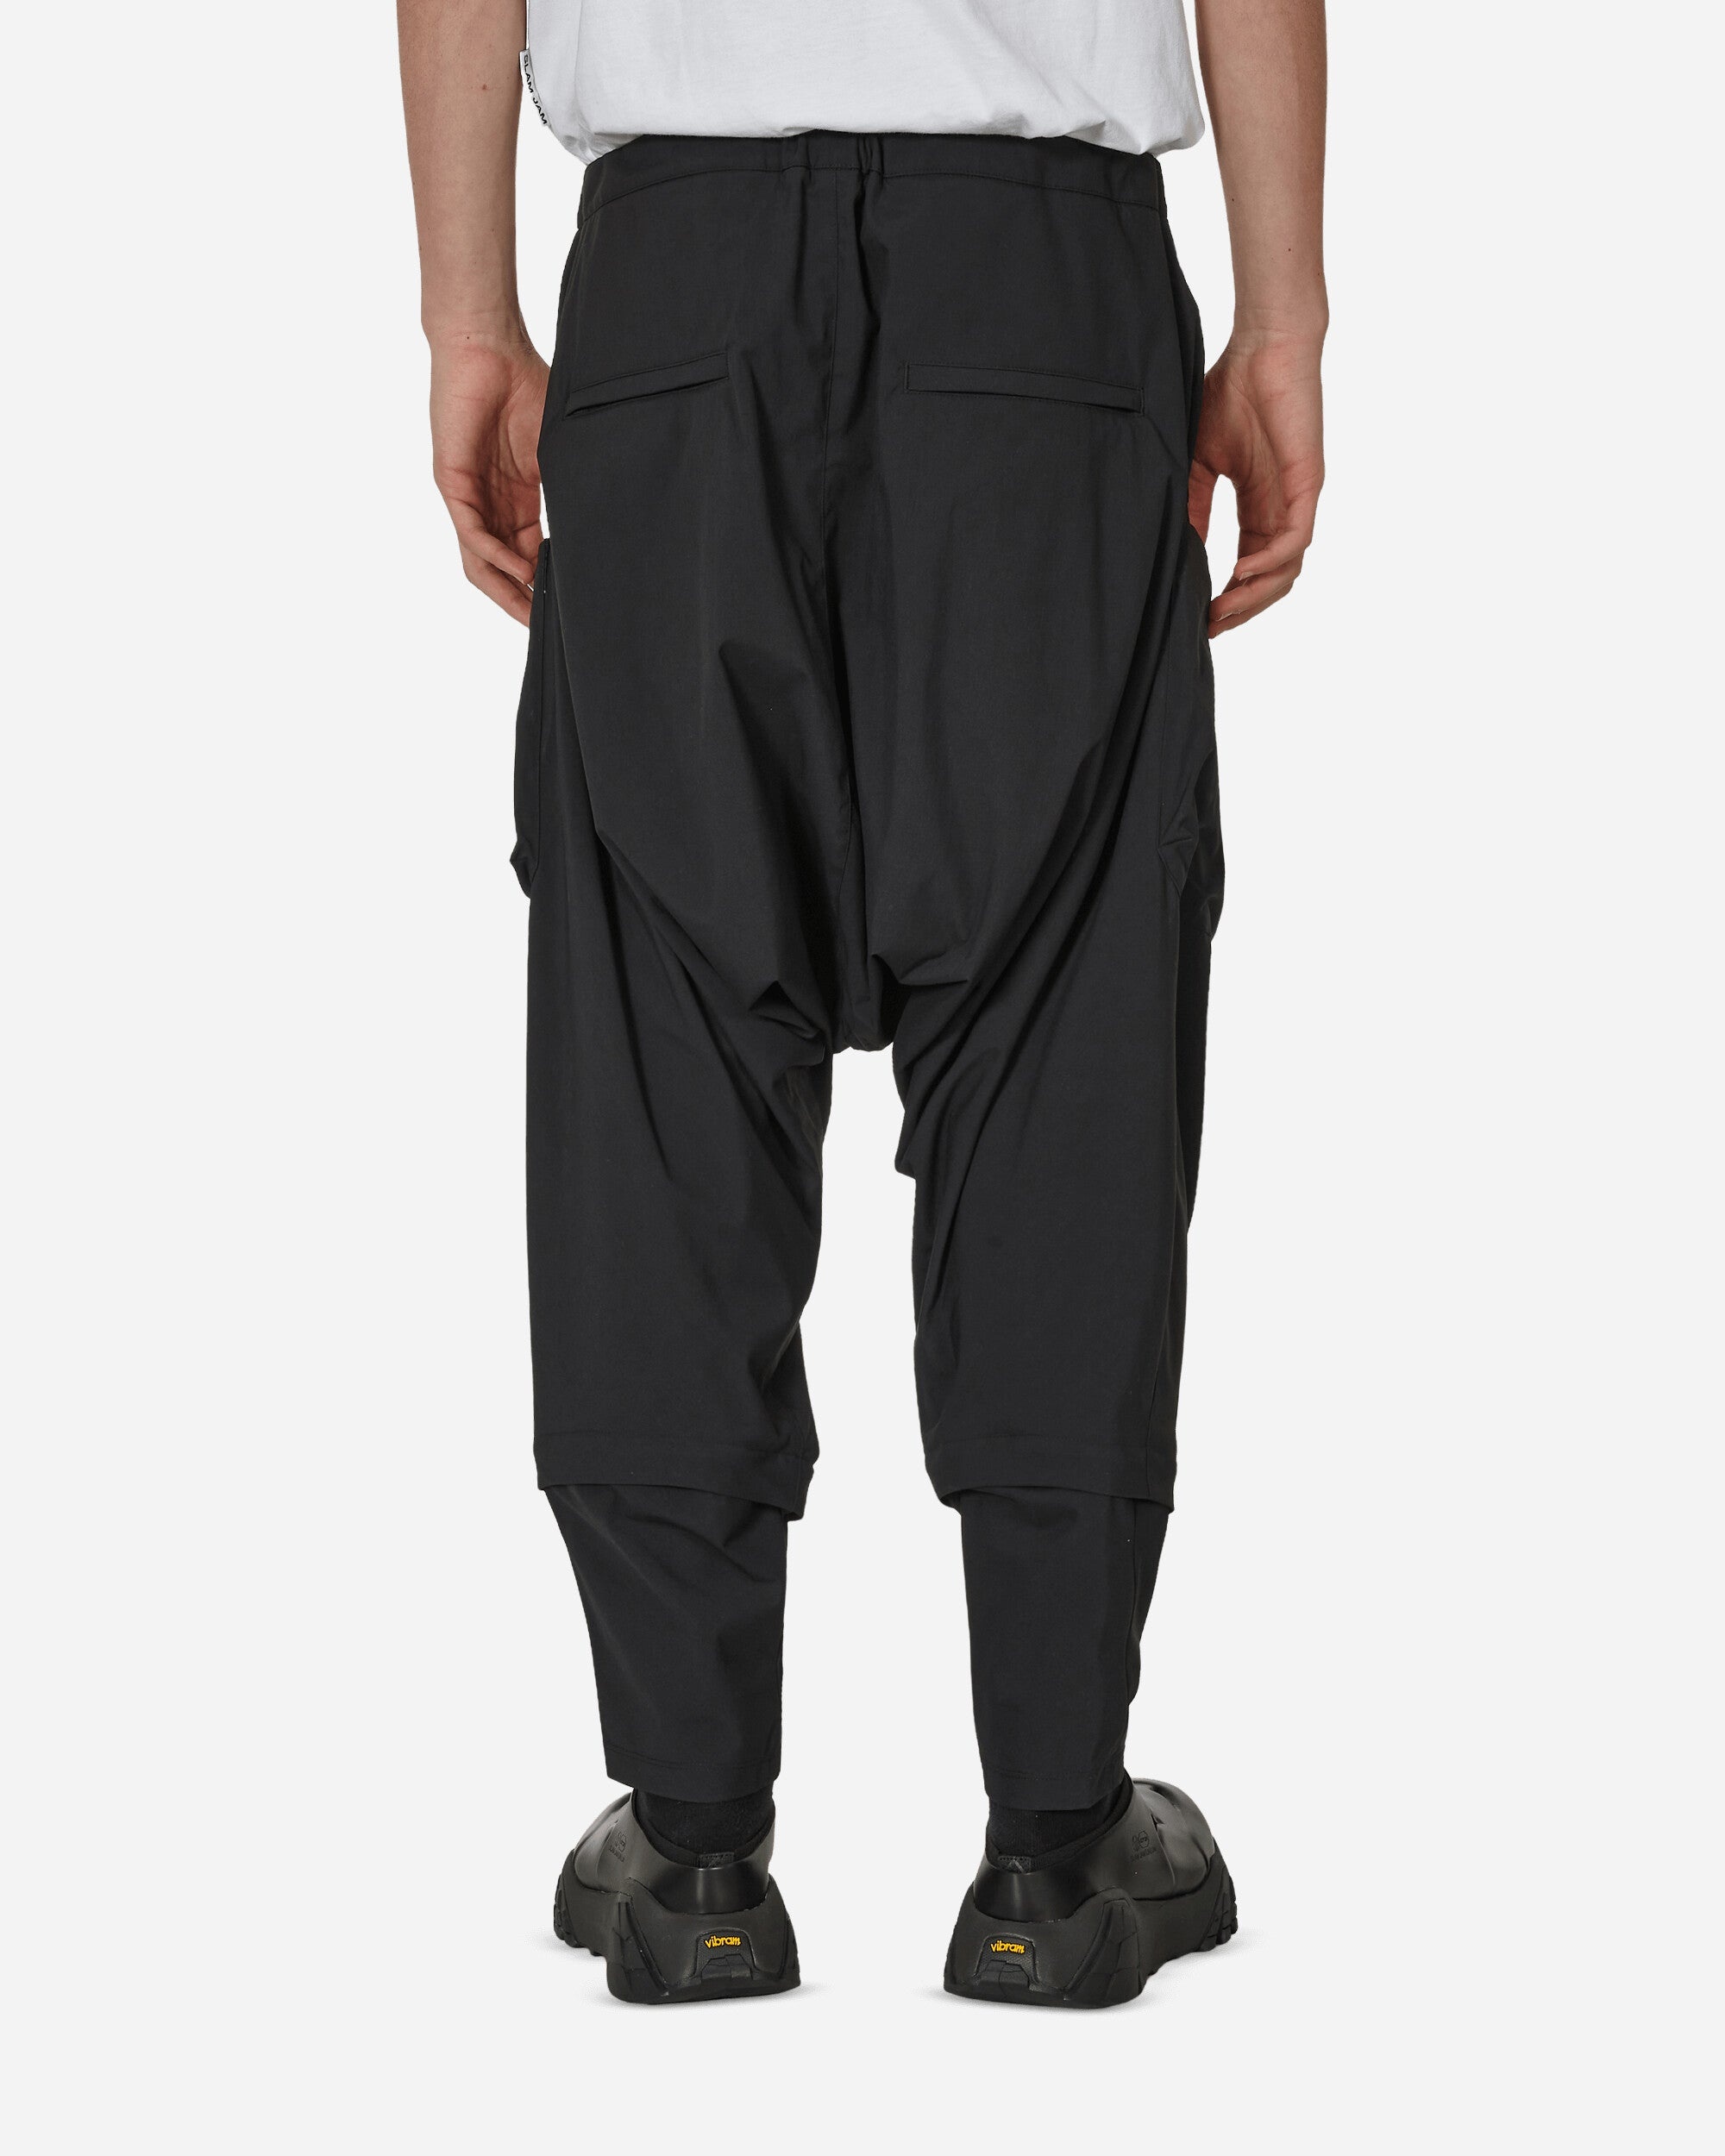 Encapsulated Nylon Articulated Cargo Trousers Black - 3